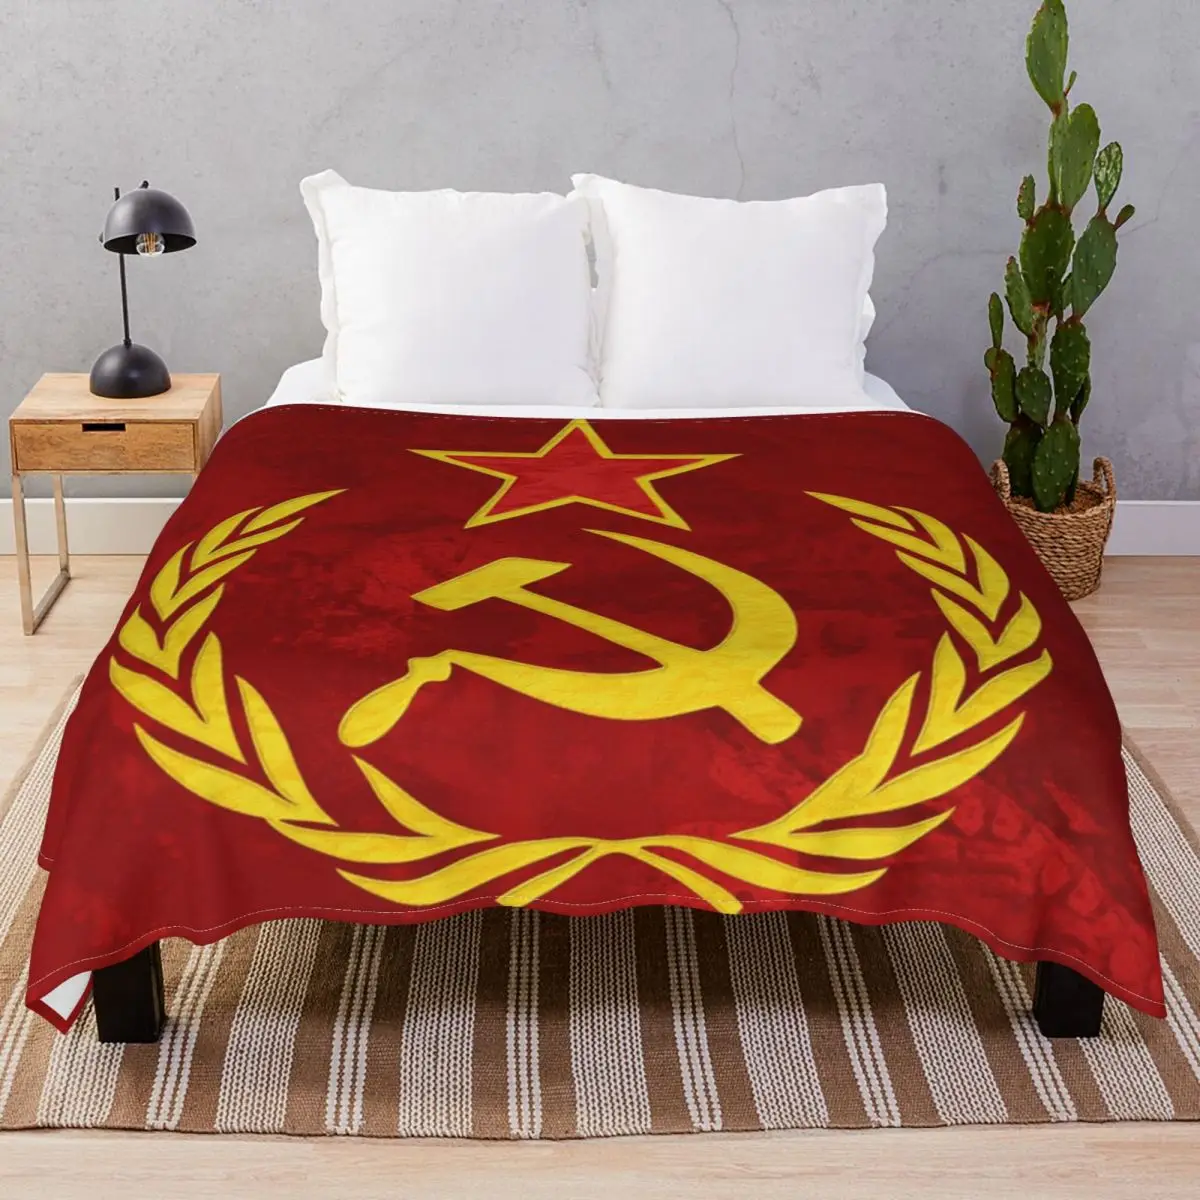 HAMMER AND SICKLE Blankets Flannel Winter Breathable Throw Blanket for Bed Sofa Camp Cinema